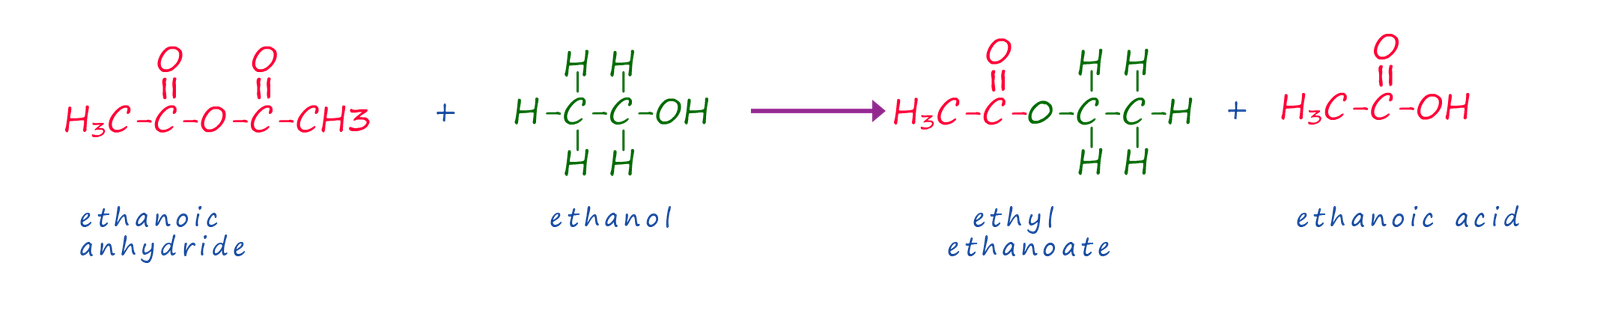 making ethyl ethanoate ester using acid anhydride and the alcohol ethanol